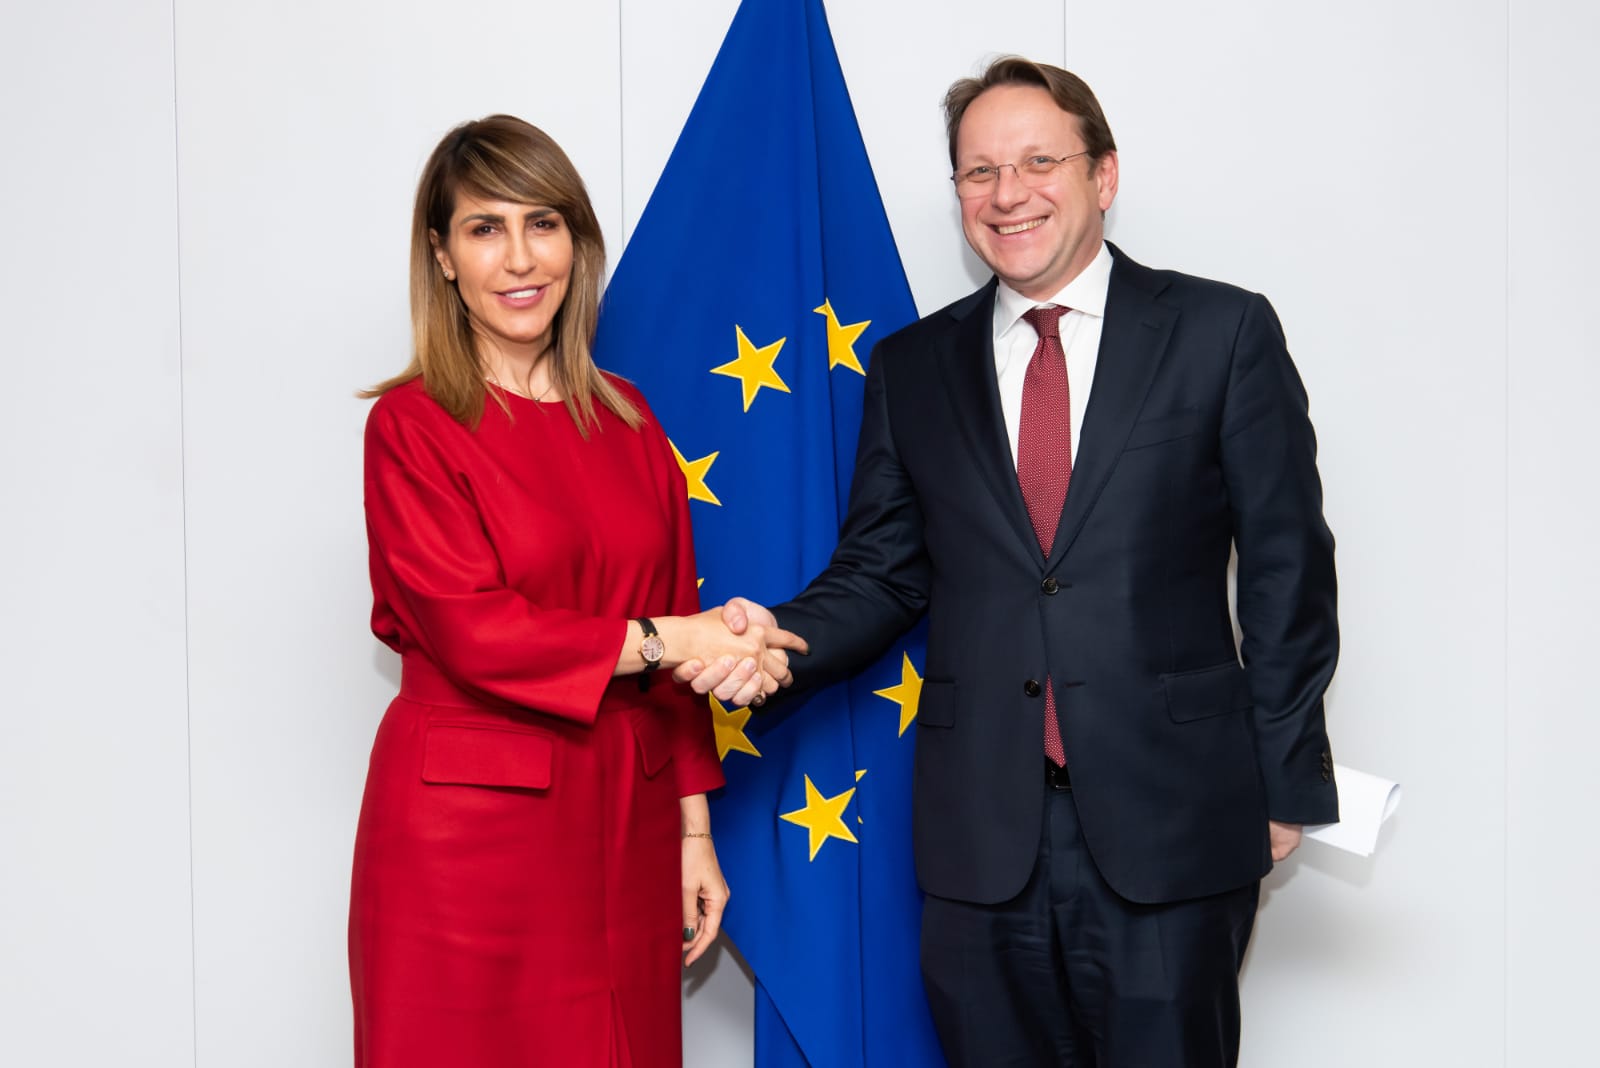 RCC Secretary General Majlinda Bregu met with EU Commissioner for Neighbourhood and Enlargement Oliver Varhelyi, in Brussels on 30 January 2020, to talks about enhancing regional cooperation in the Western Balkans and further connecting the economies of the region among themselves and with the EU (Photo: Courtesy of the European Comission)